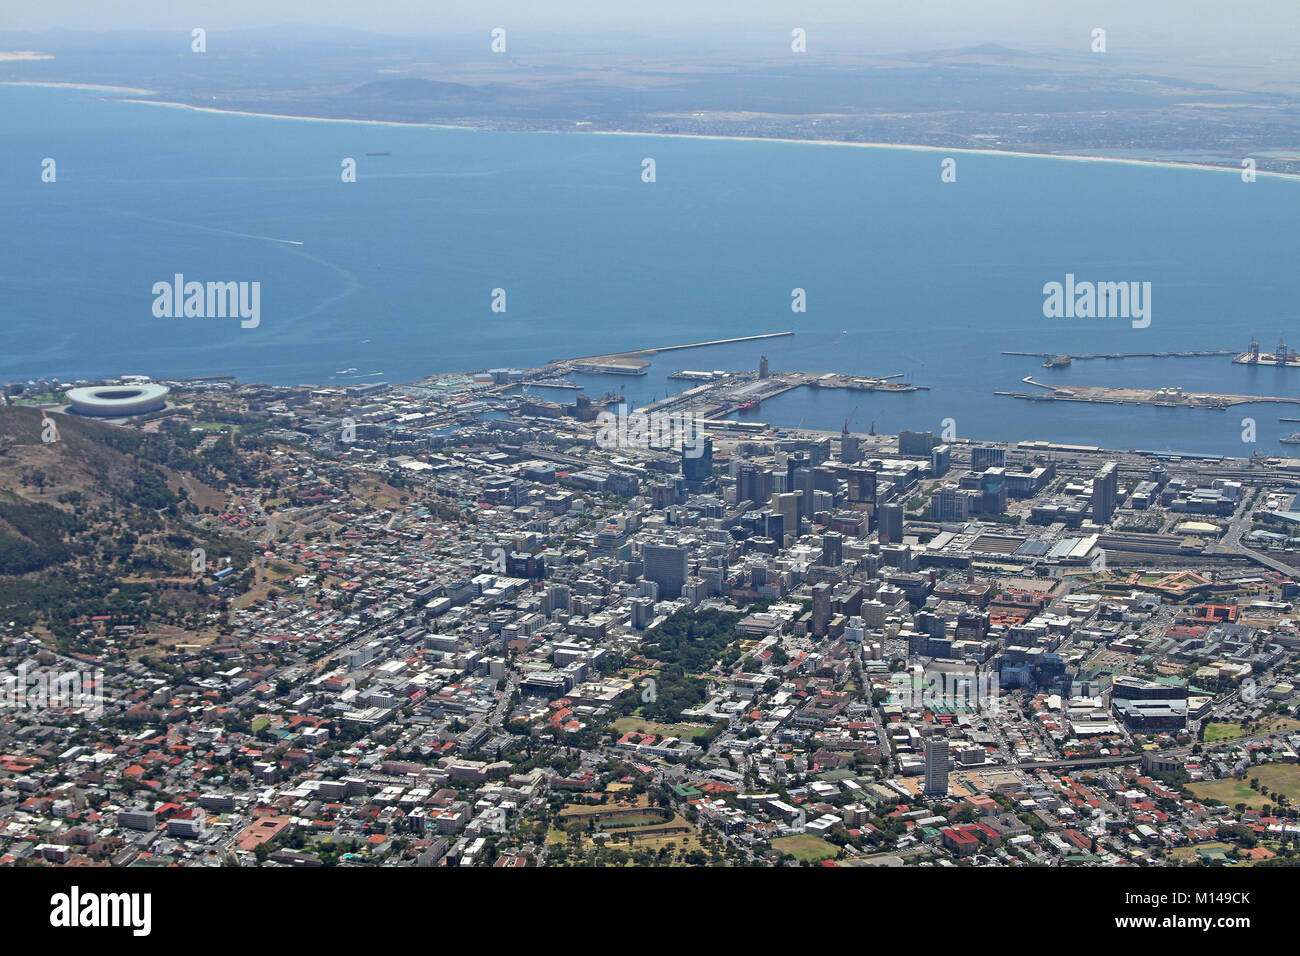 View of Midtown Cape Town, base of Signal Hill, V&A Waterfront, Harbour and Stadium from Top of Table Mountain, Western Cape, South Africa. Stock Photo